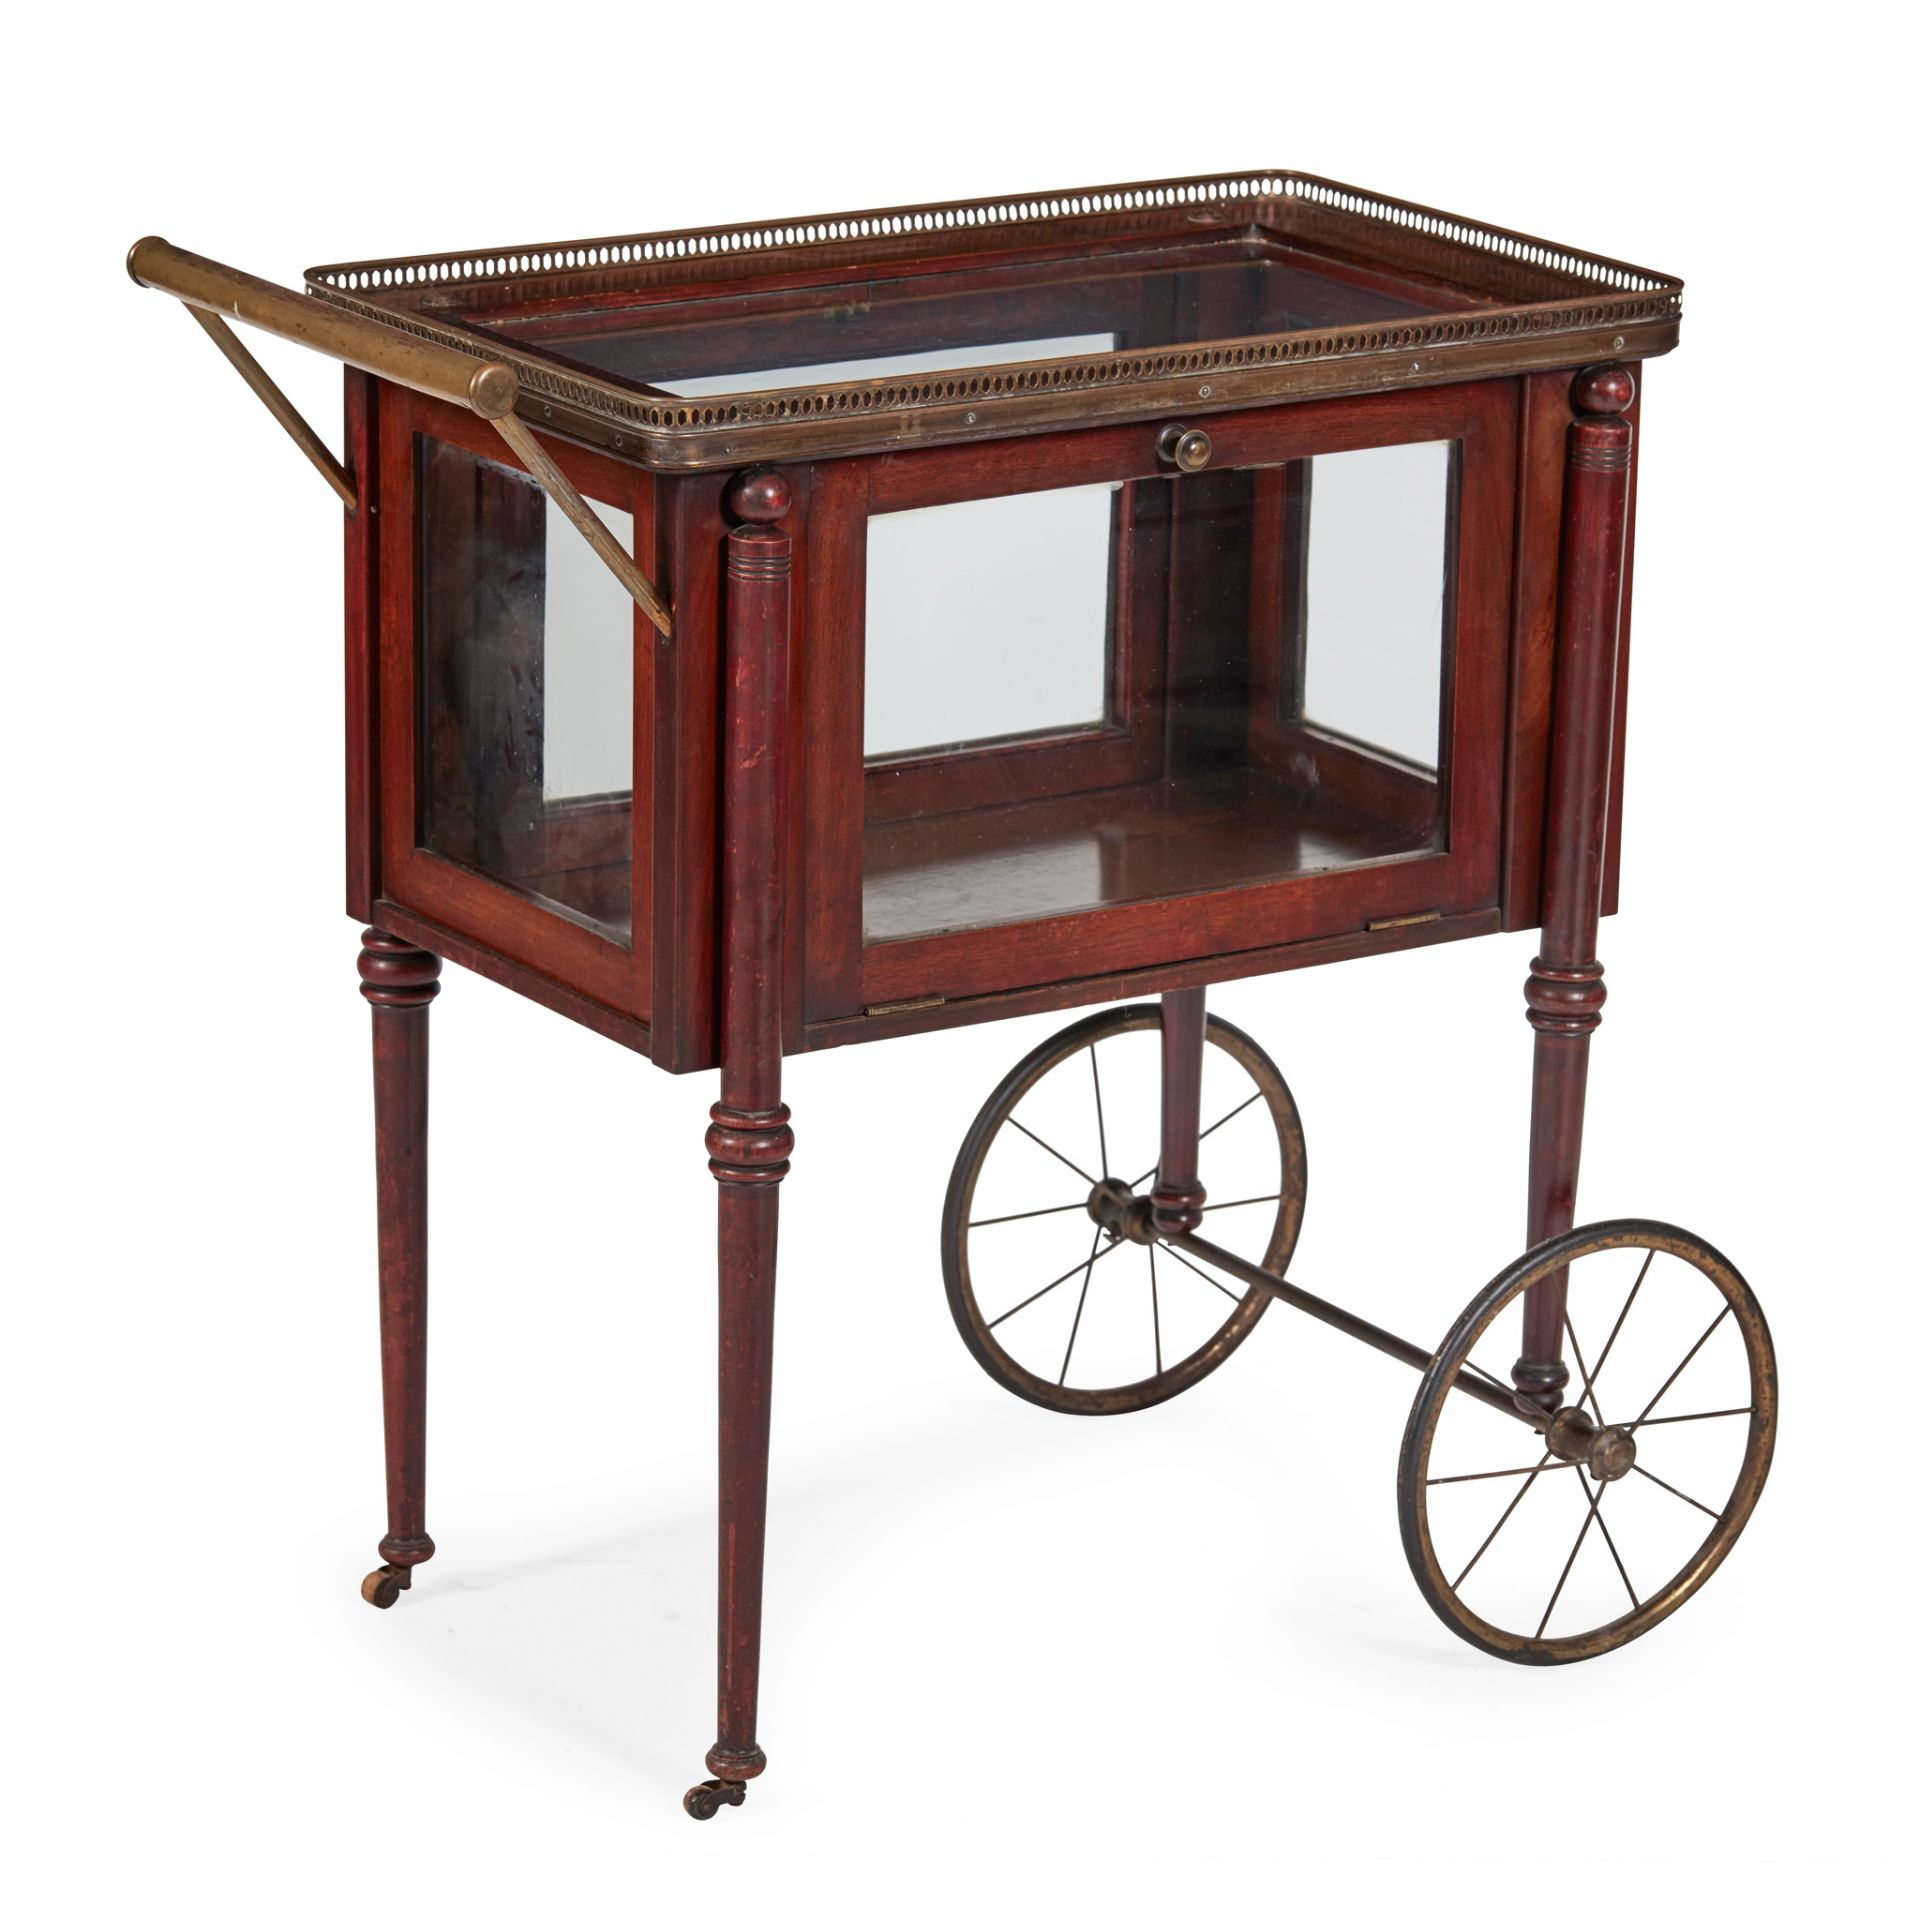 LATE VICTORIAN MAHOGANY AND BRASS TEA TROLLEY LATE 19TH CENTURY